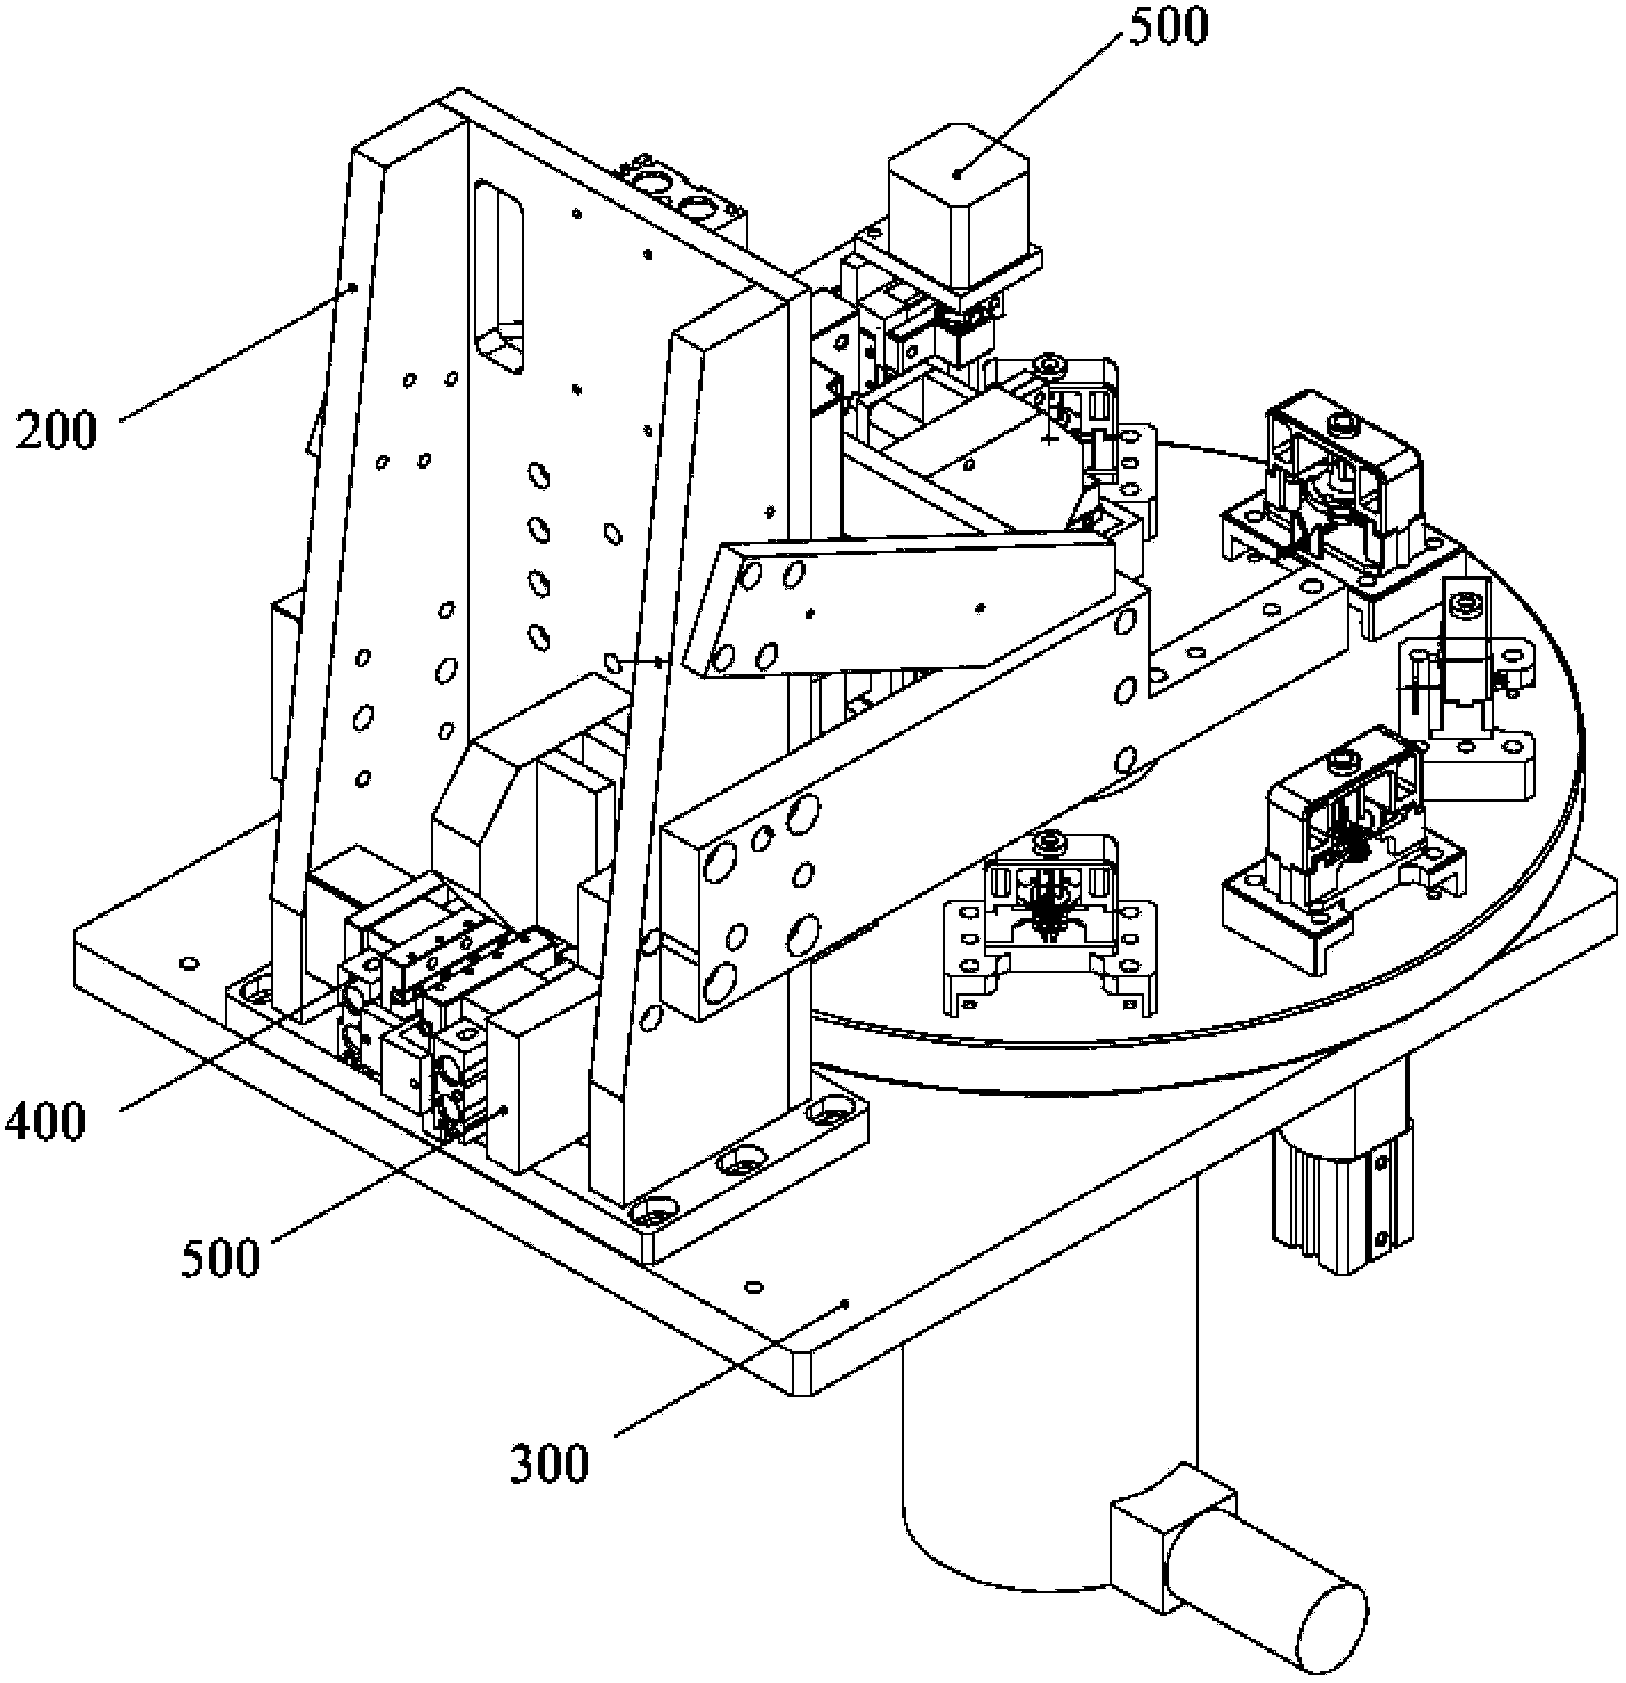 Automatic accurate adjustment system for instrument movement clearance